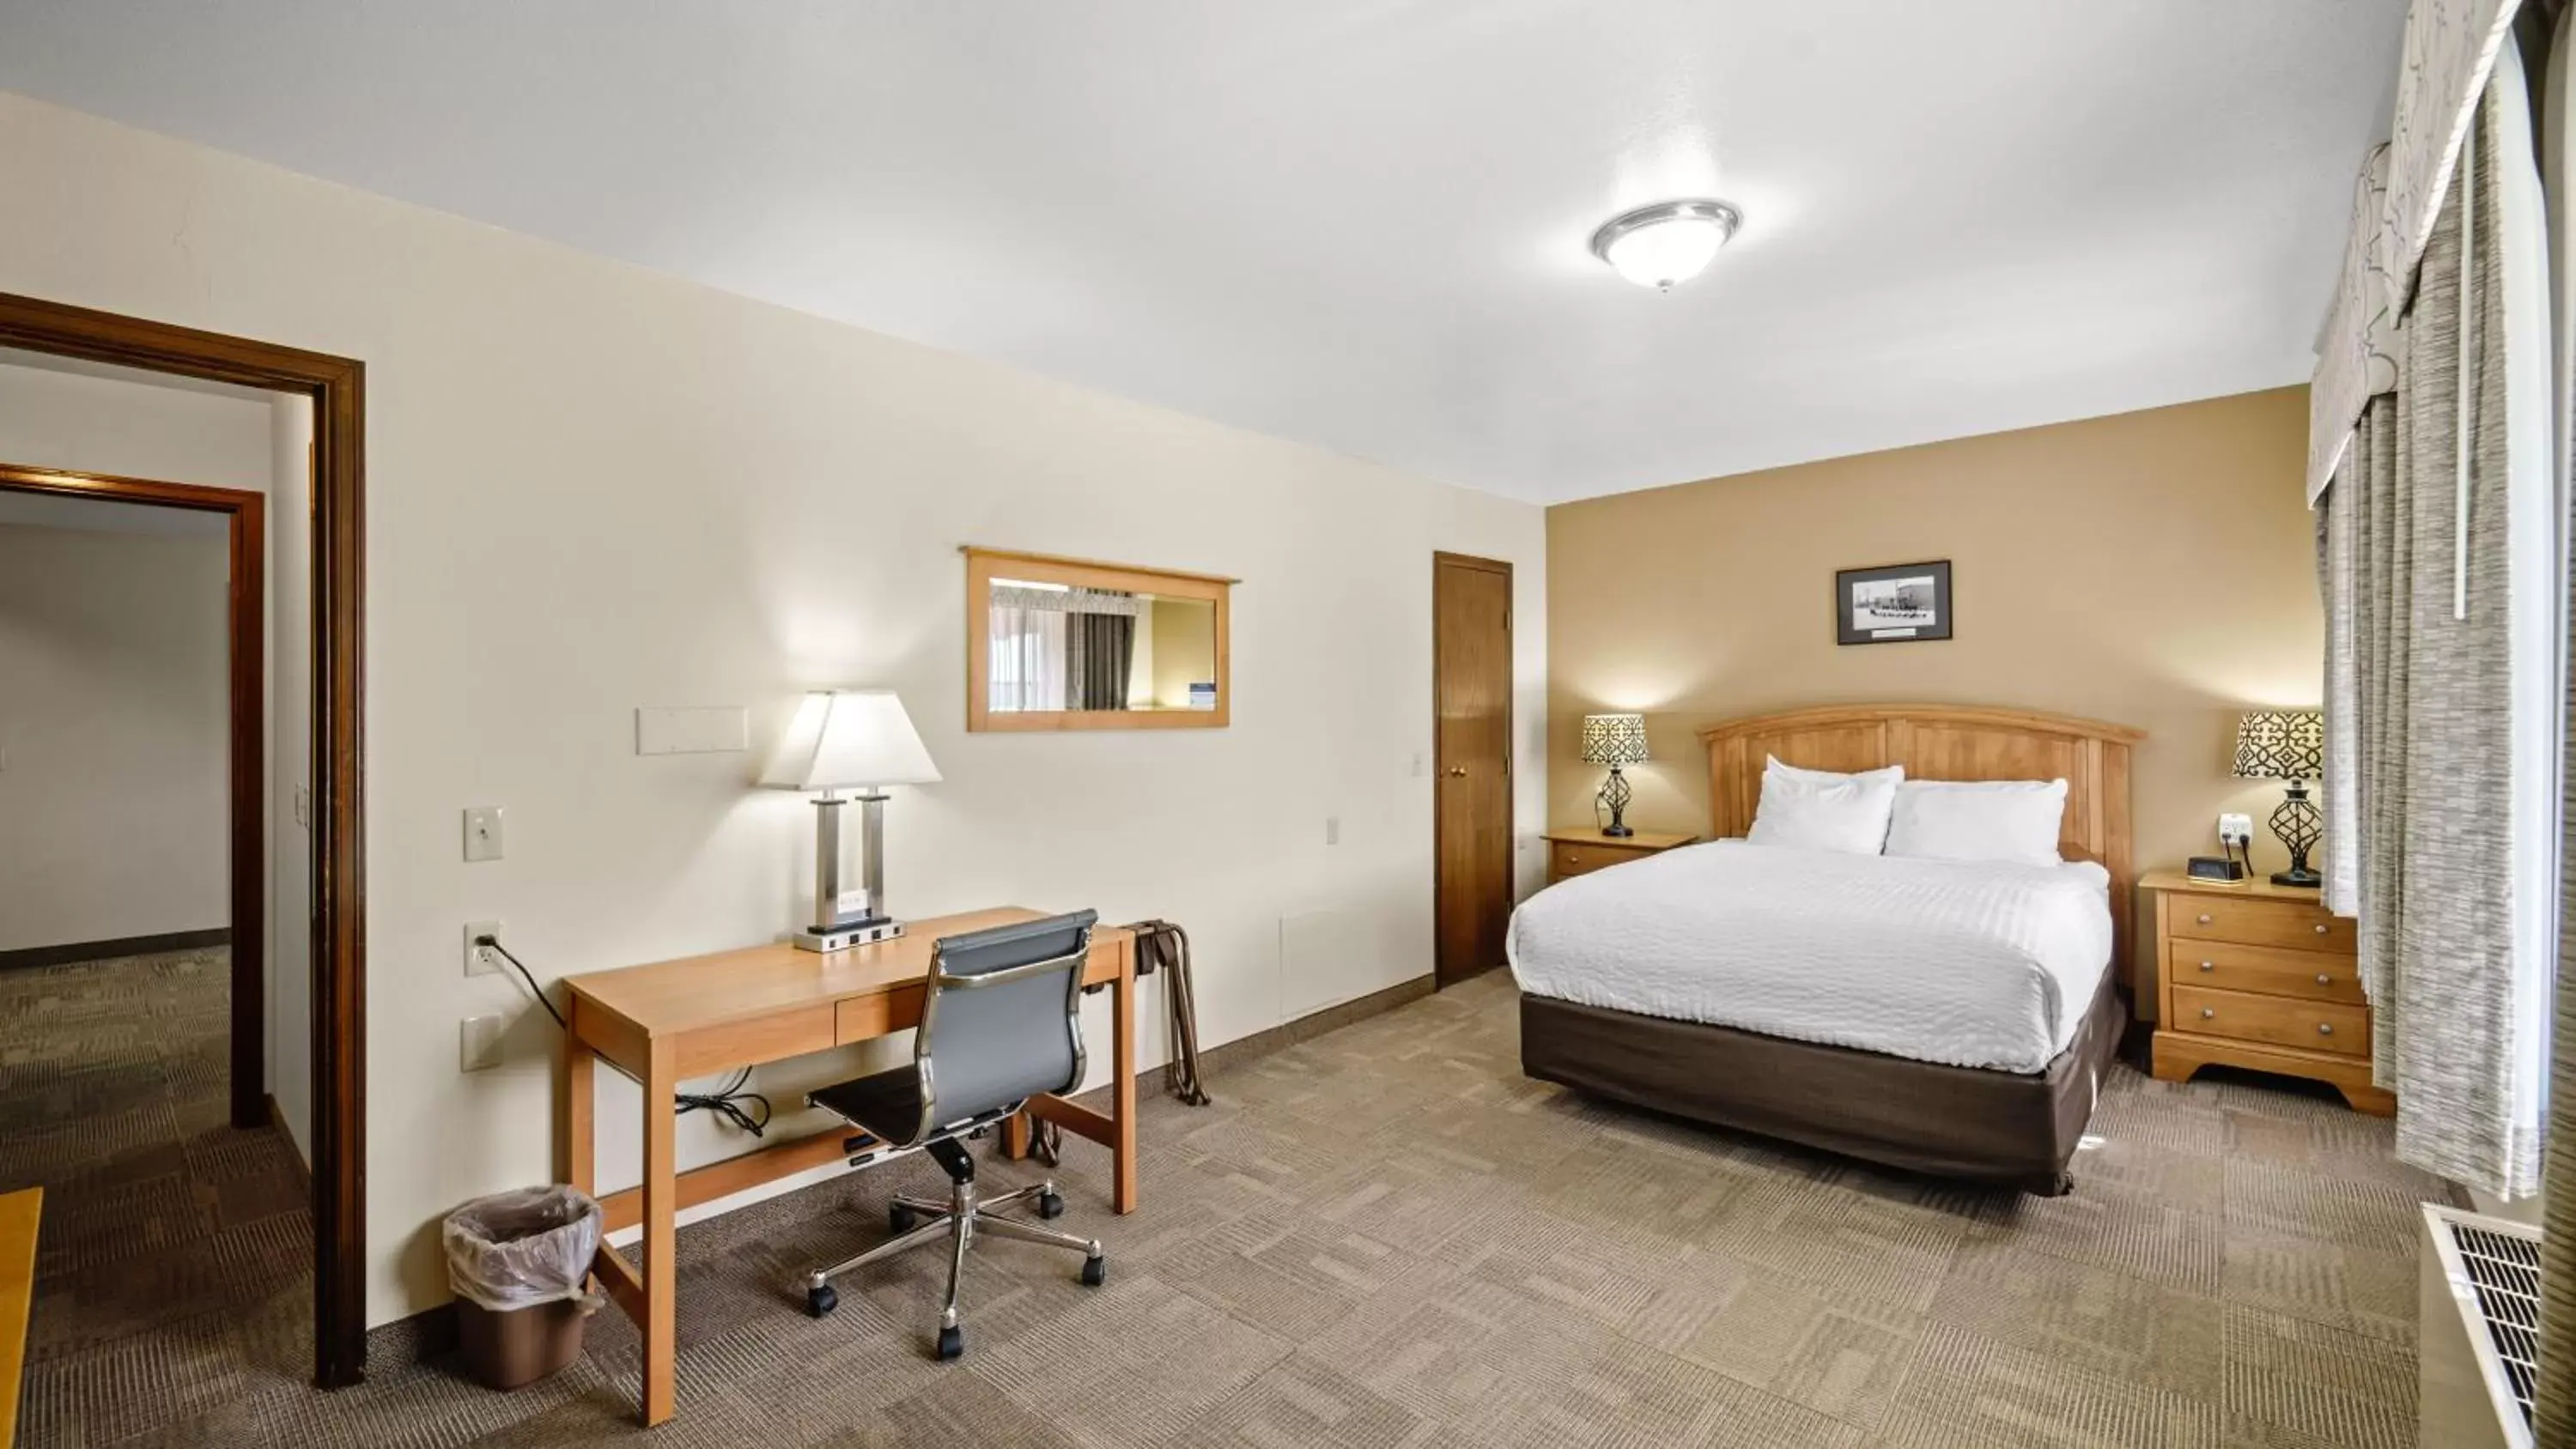 VIP in Clarion Hotel & Suites Fairbanks near Ft. Wainwright